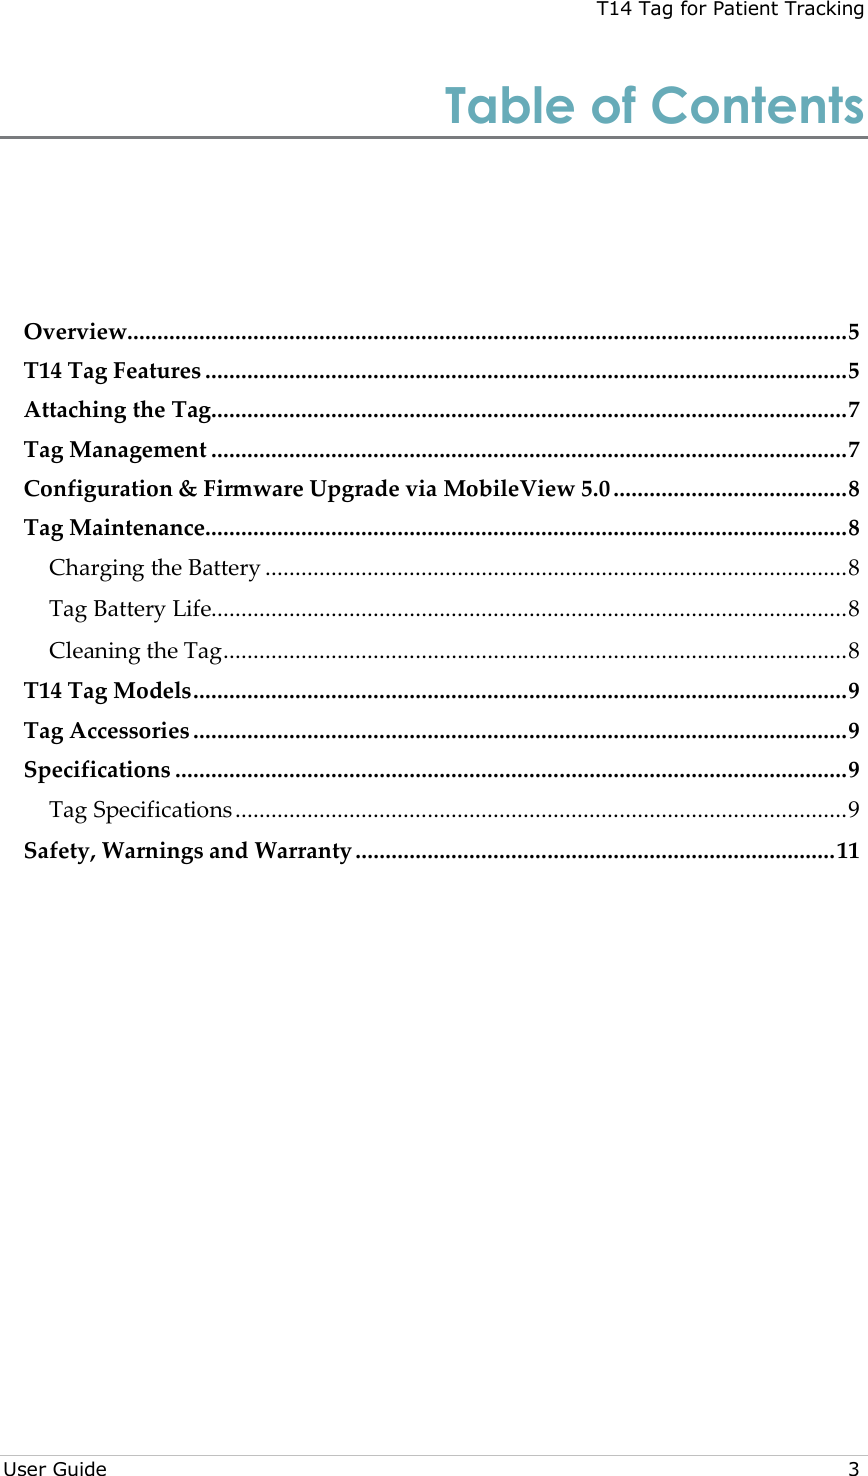 T14 Tag for Patient Tracking  User Guide  3 Table of Contents Overview ........................................................................................................................ 5 T14 Tag Features ........................................................................................................... 5 Attaching the Tag .......................................................................................................... 7 Tag Management .......................................................................................................... 7 Configuration &amp; Firmware Upgrade via MobileView 5.0 ....................................... 8 Tag Maintenance........................................................................................................... 8 Charging the Battery ................................................................................................. 8 Tag Battery Life.......................................................................................................... 8 Cleaning the Tag ........................................................................................................ 8 T14 Tag Models ............................................................................................................. 9 Tag Accessories ............................................................................................................. 9 Specifications ................................................................................................................ 9 Tag Specifications ...................................................................................................... 9 Safety, Warnings and Warranty ................................................................................ 11  